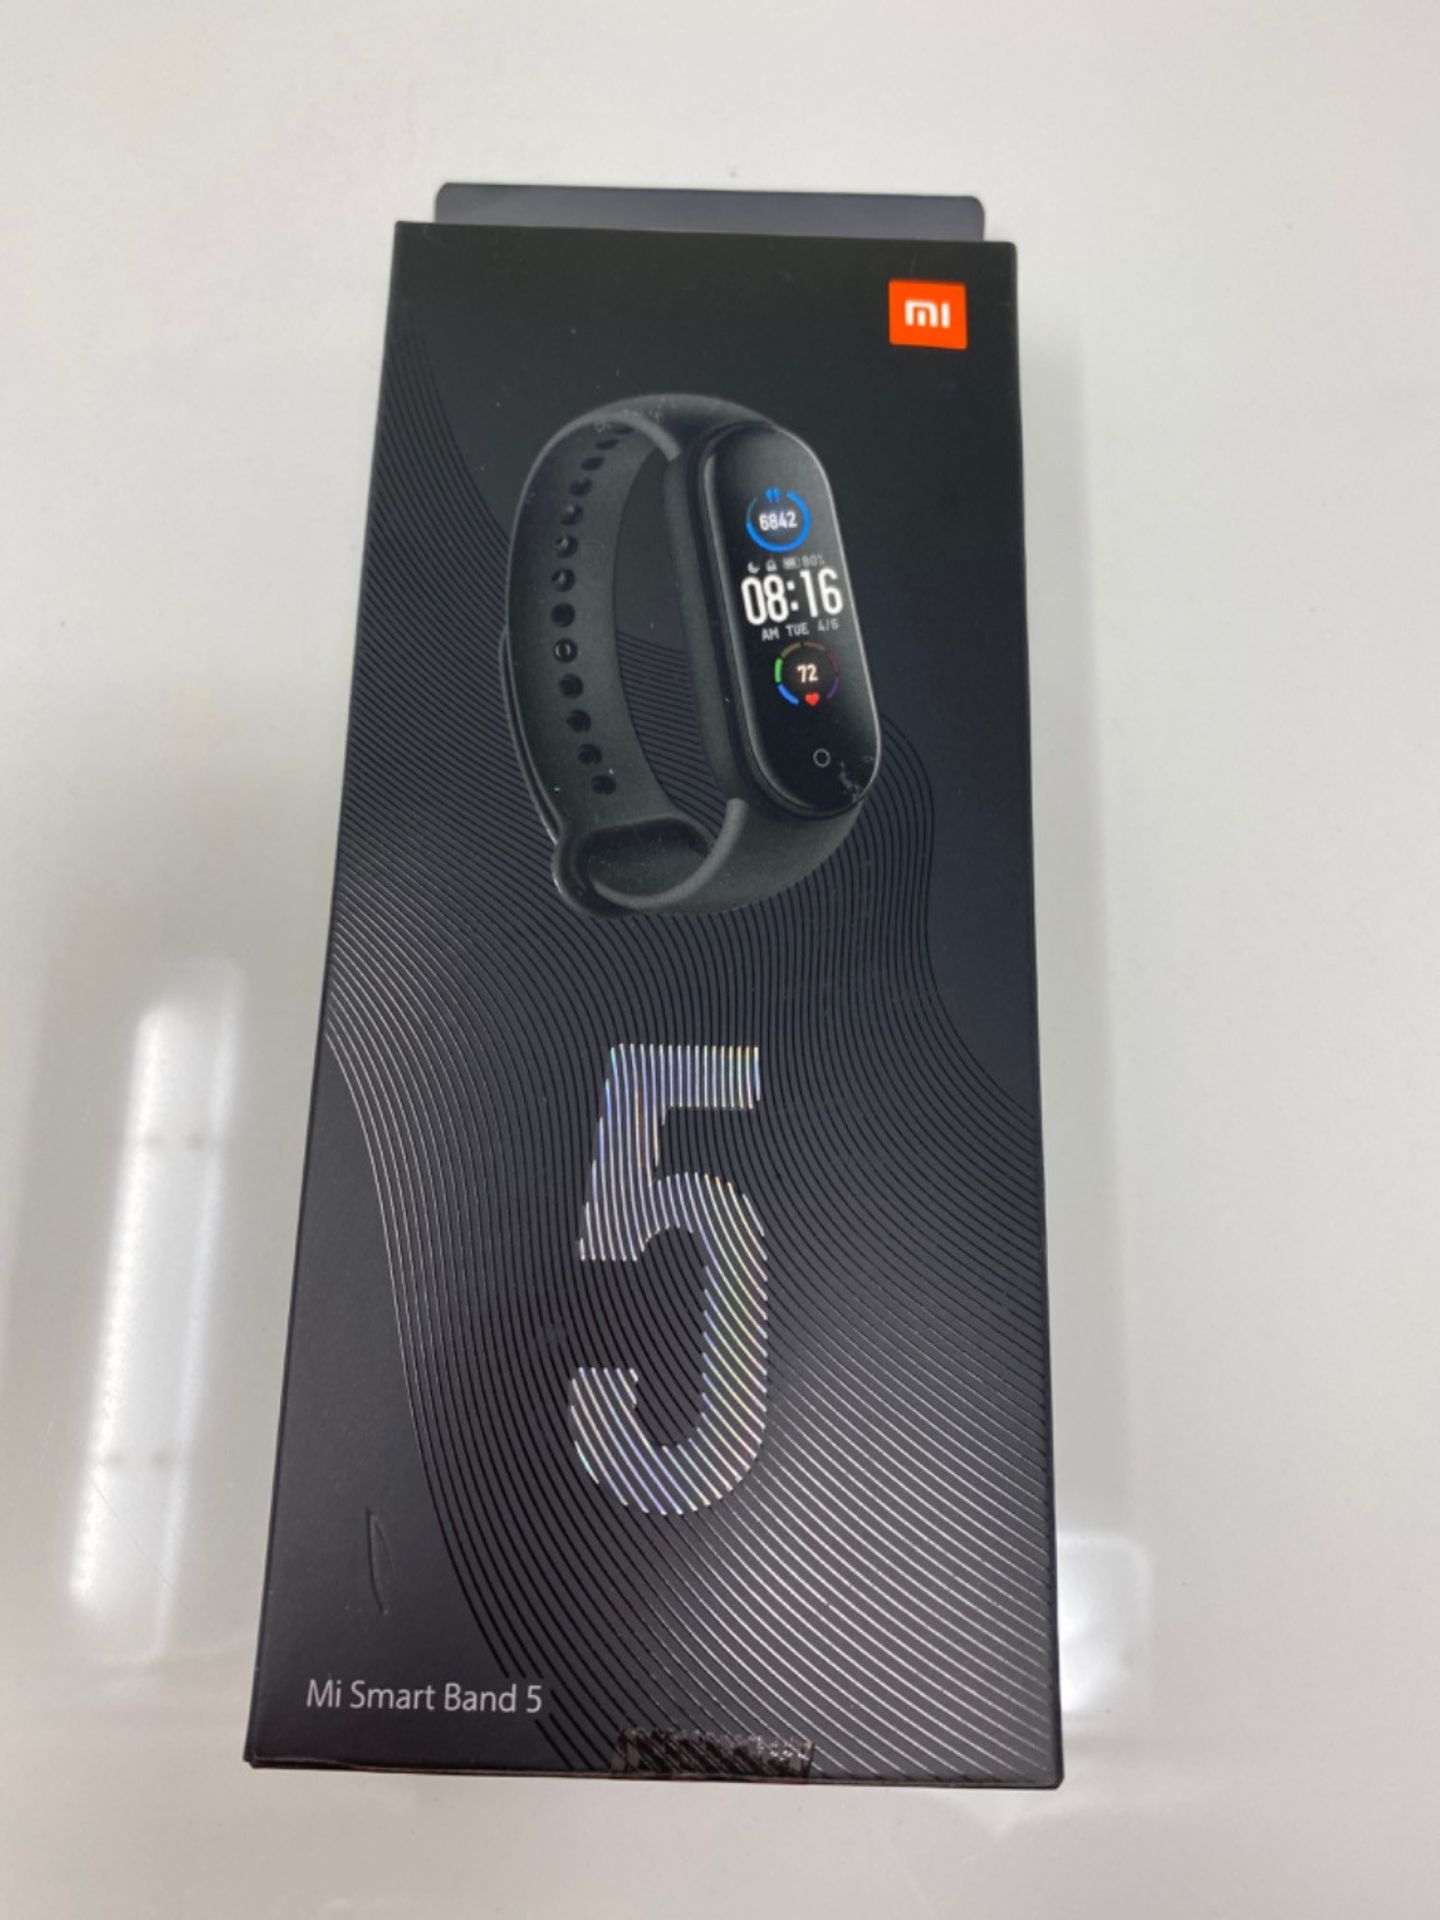 Xiaomi Mi Smart Band 5 fitness & activity tracker with 1.1 inch full AMOLED touch colo